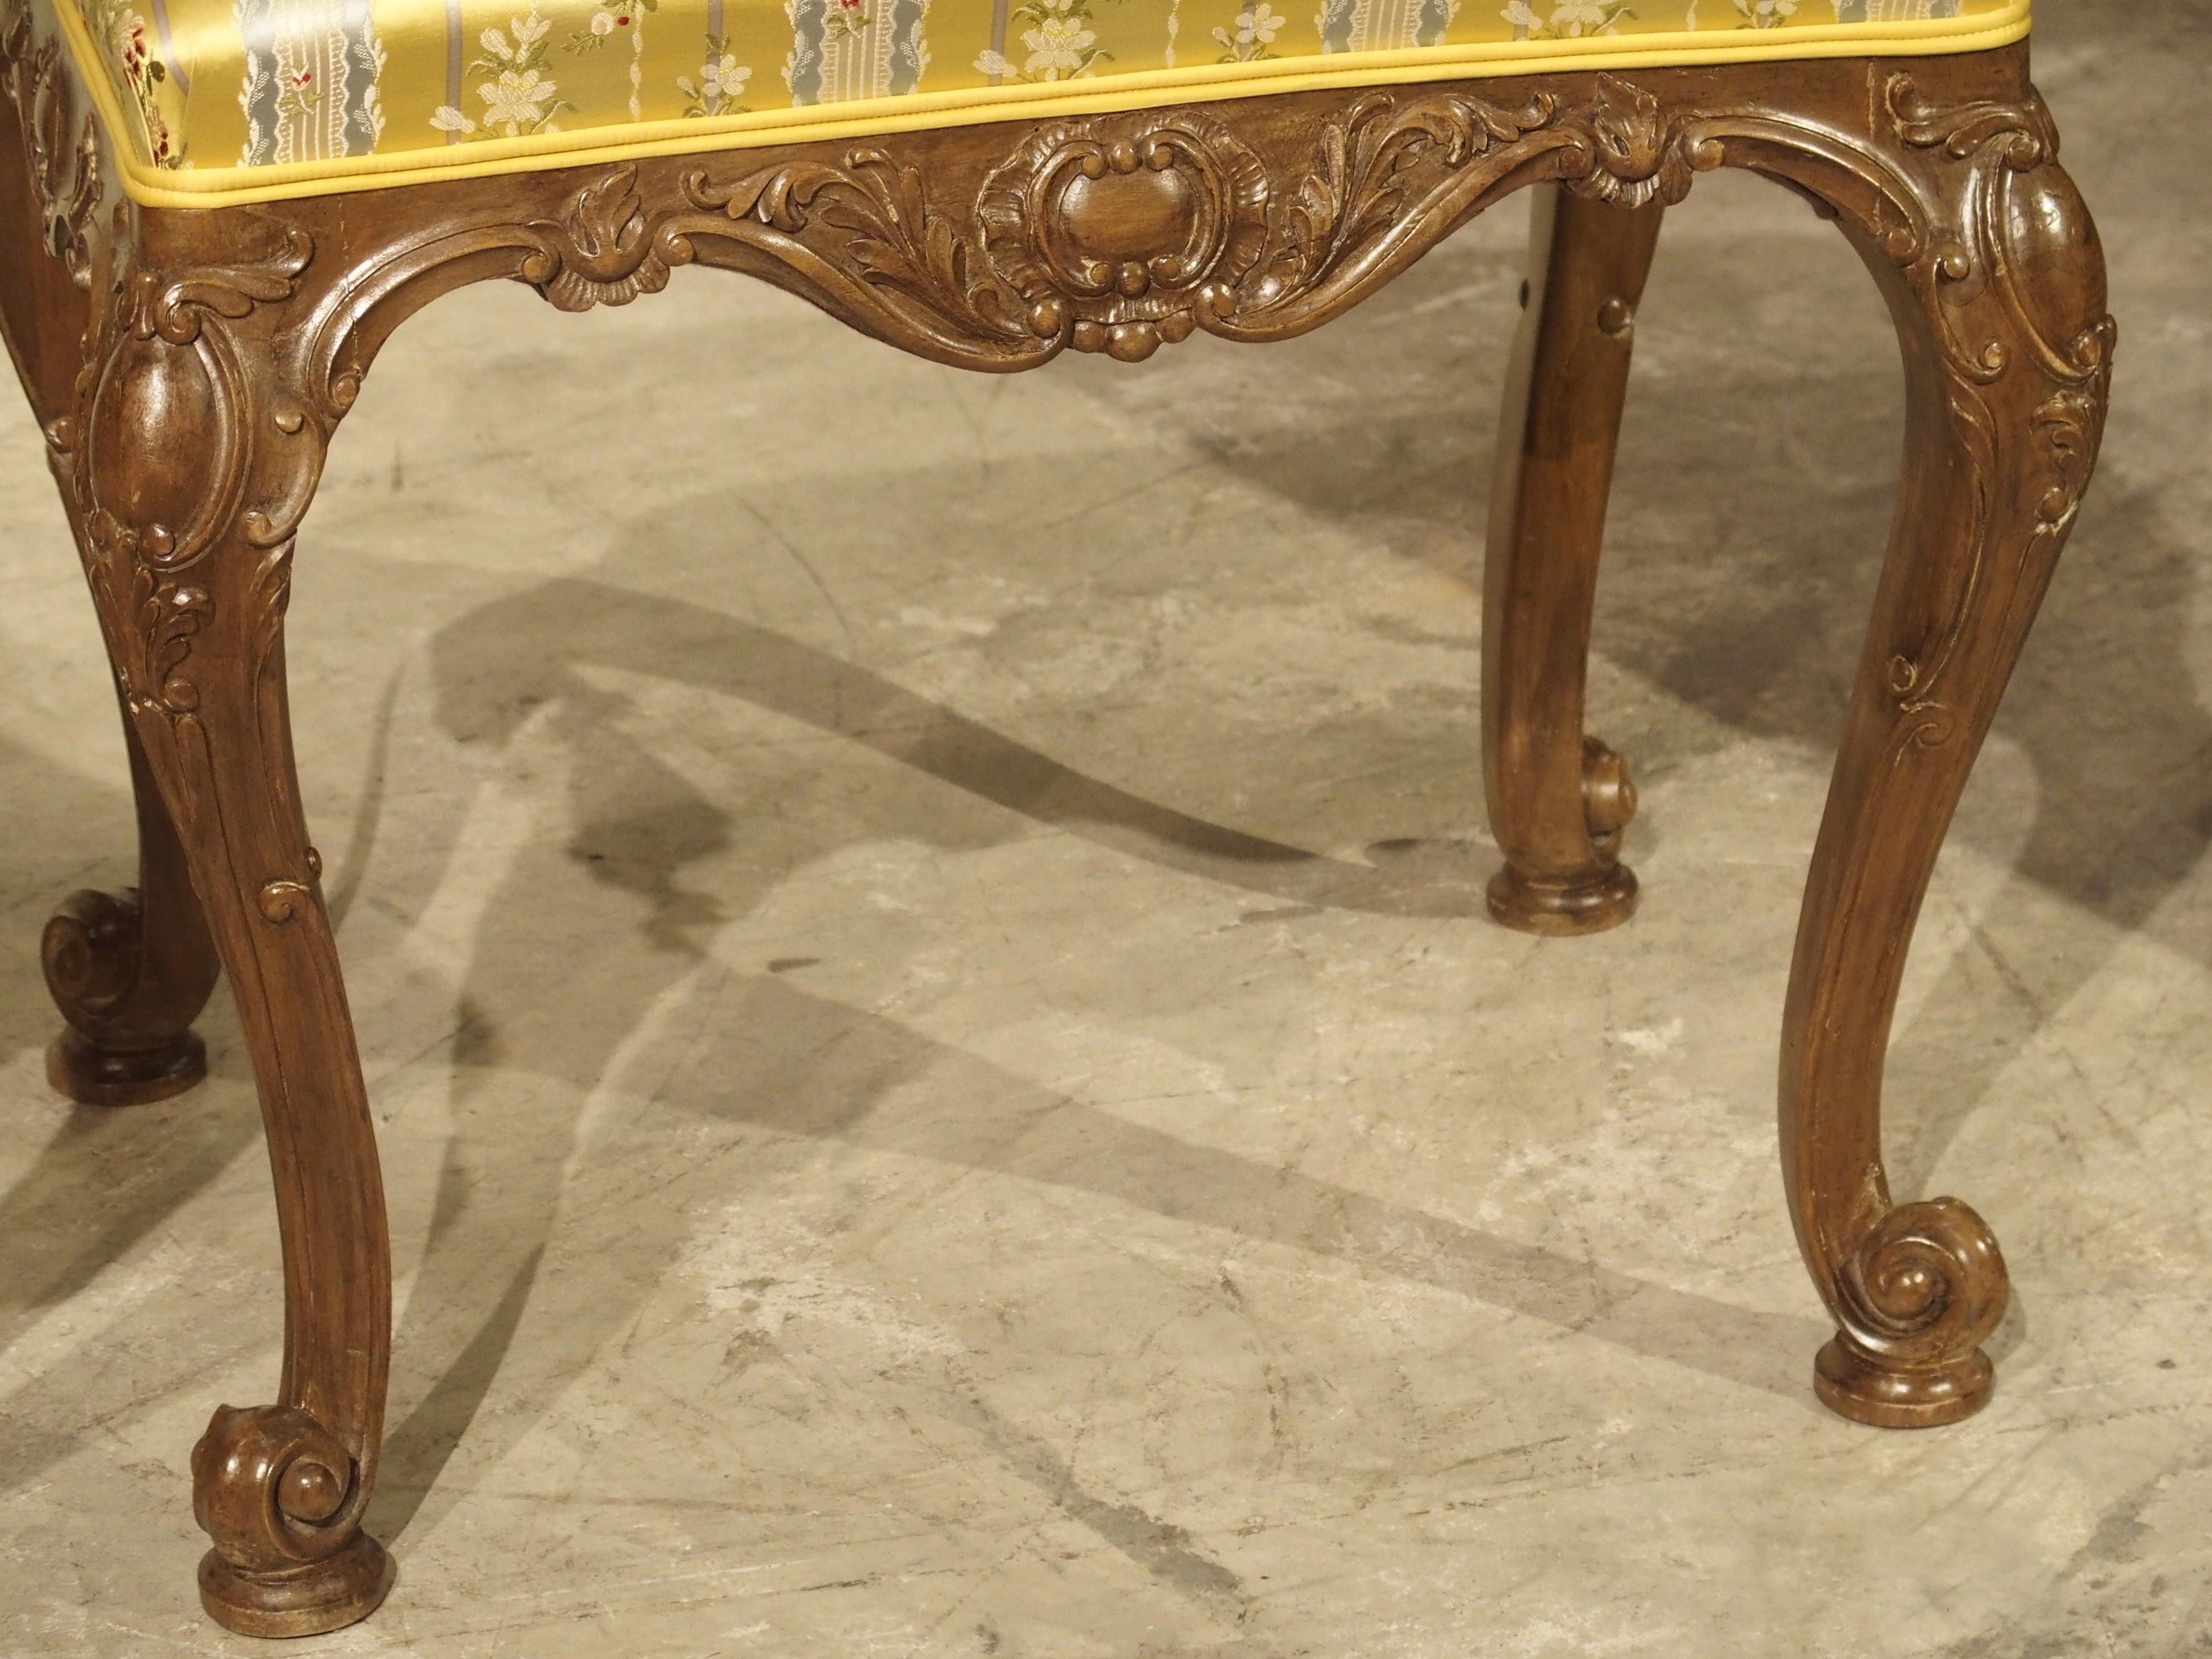 Pair of Well Carved French Louis XV Style Tabouret Stools with Silk Upholstery In Good Condition For Sale In Dallas, TX